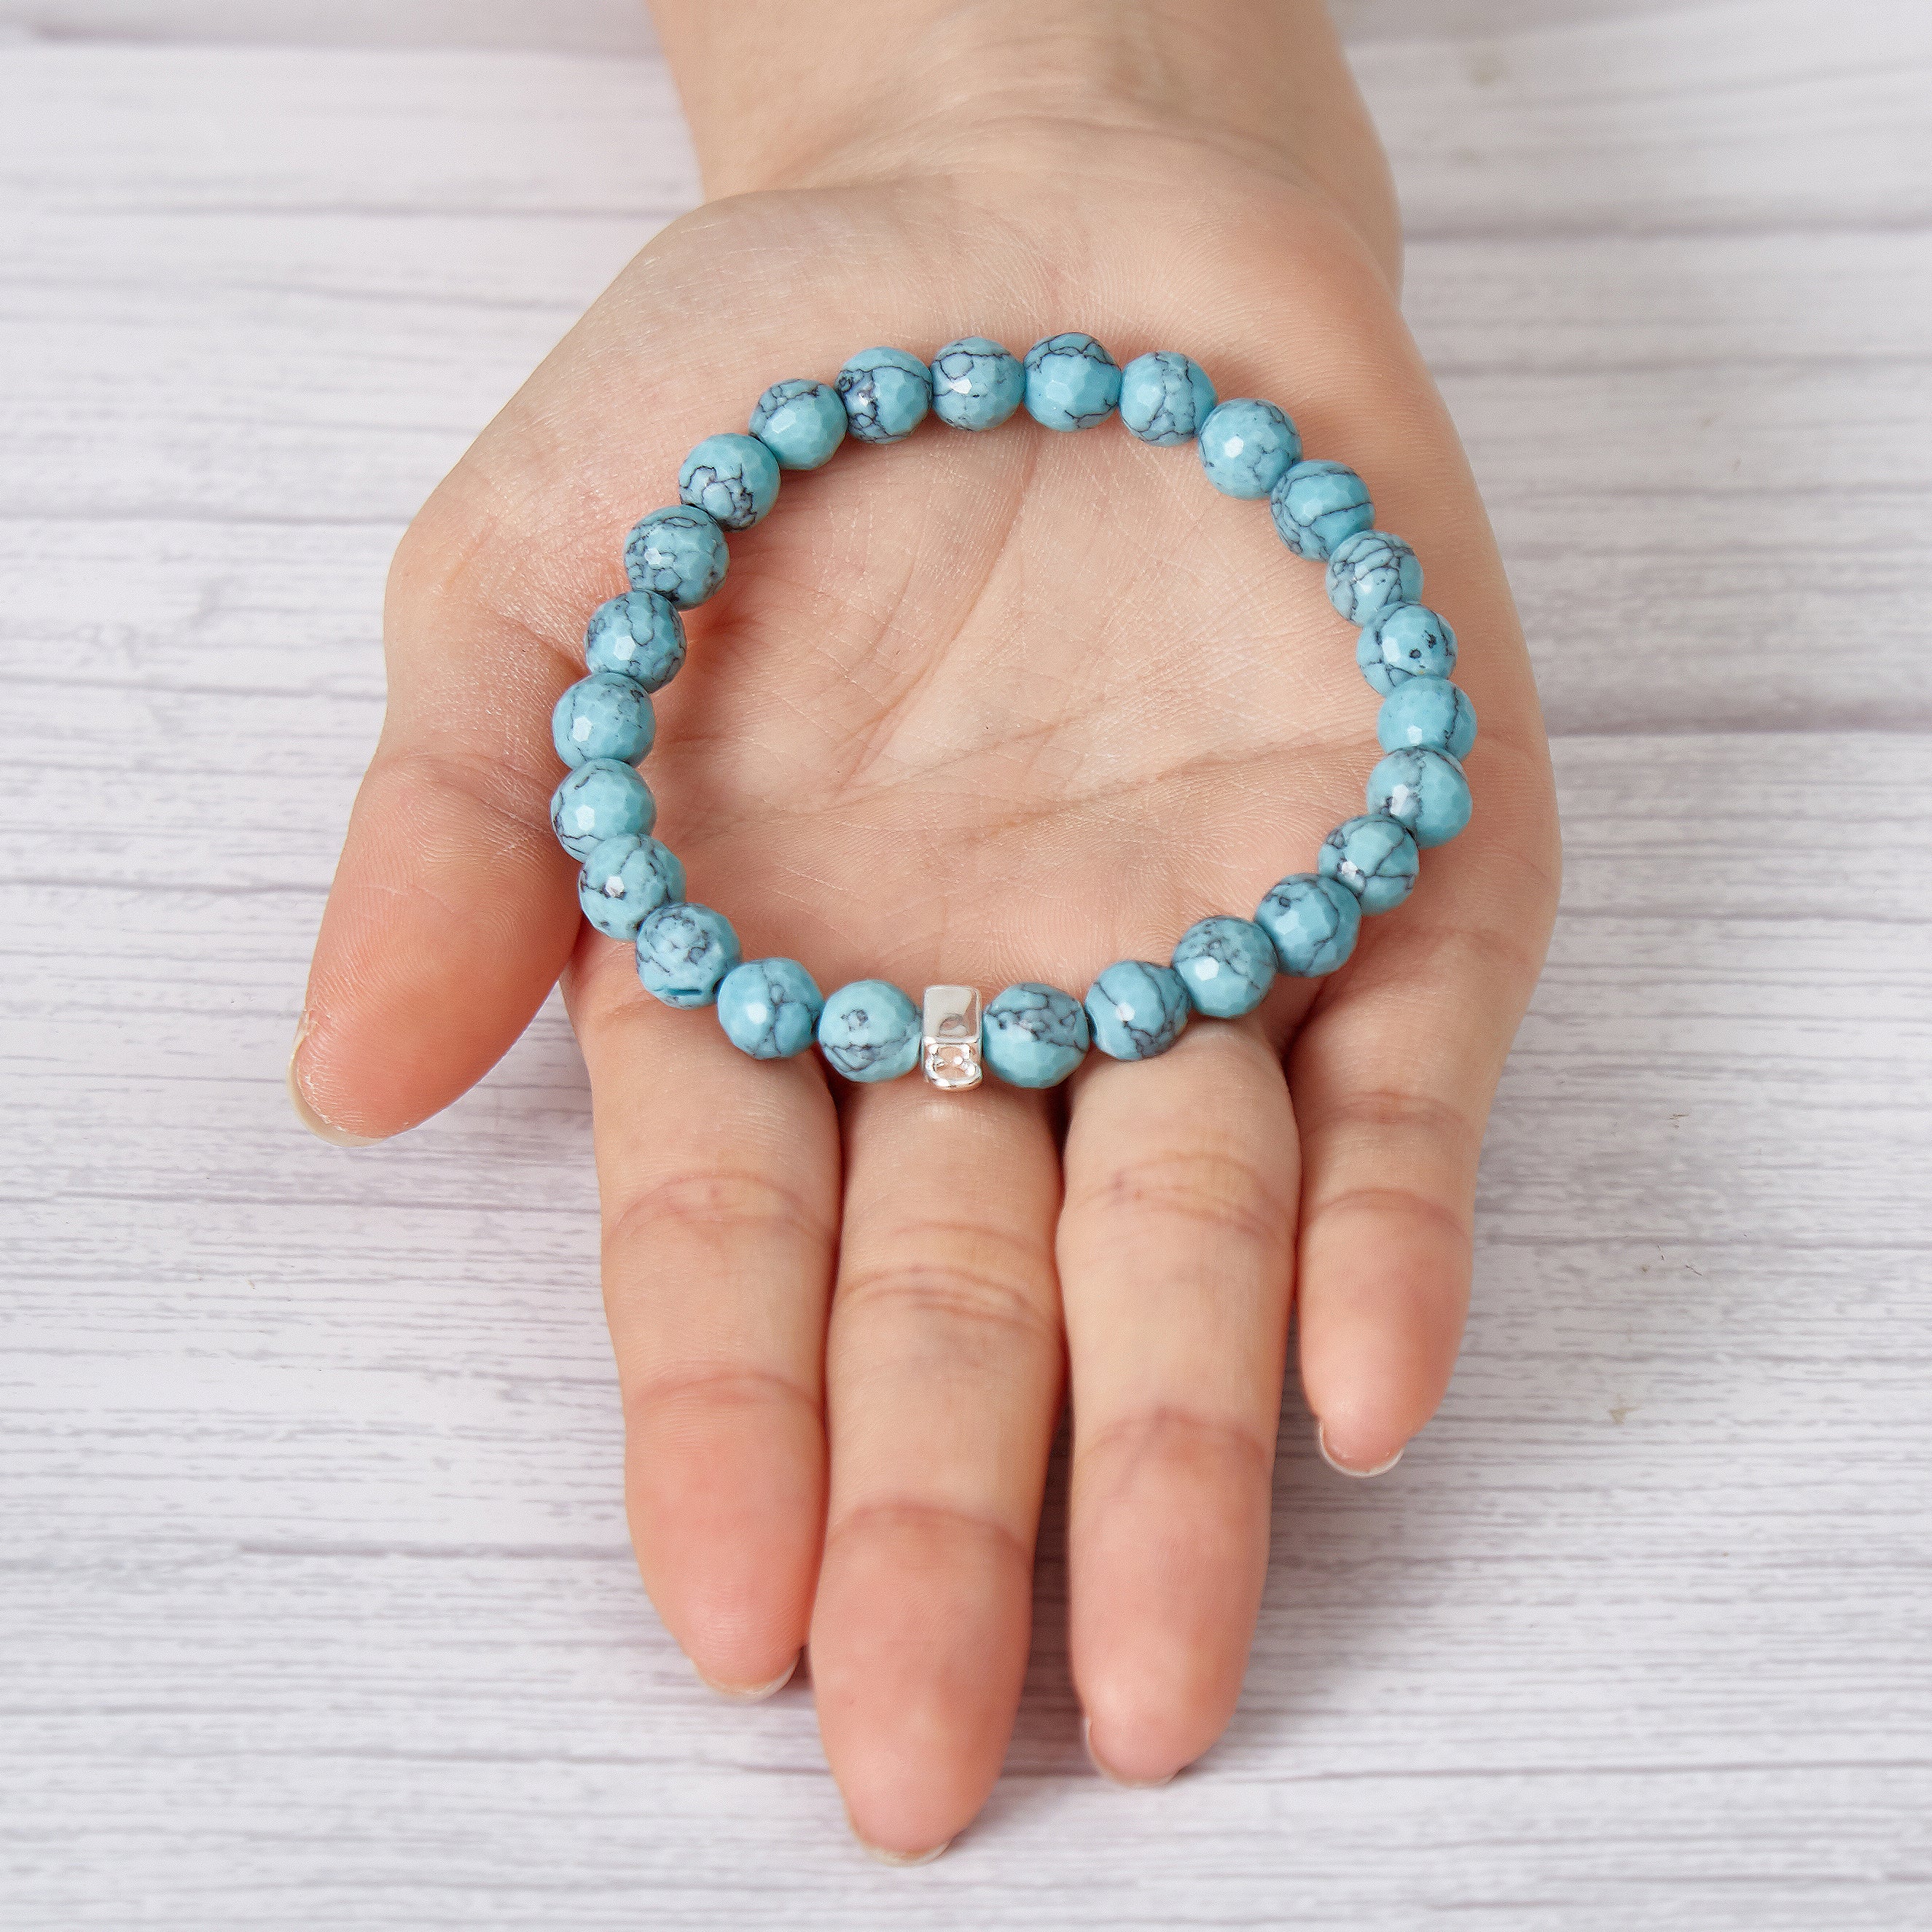 Faceted Synthetic Turquoise Gemstone Bracelet with Charm Created with Zircondia® Crystals